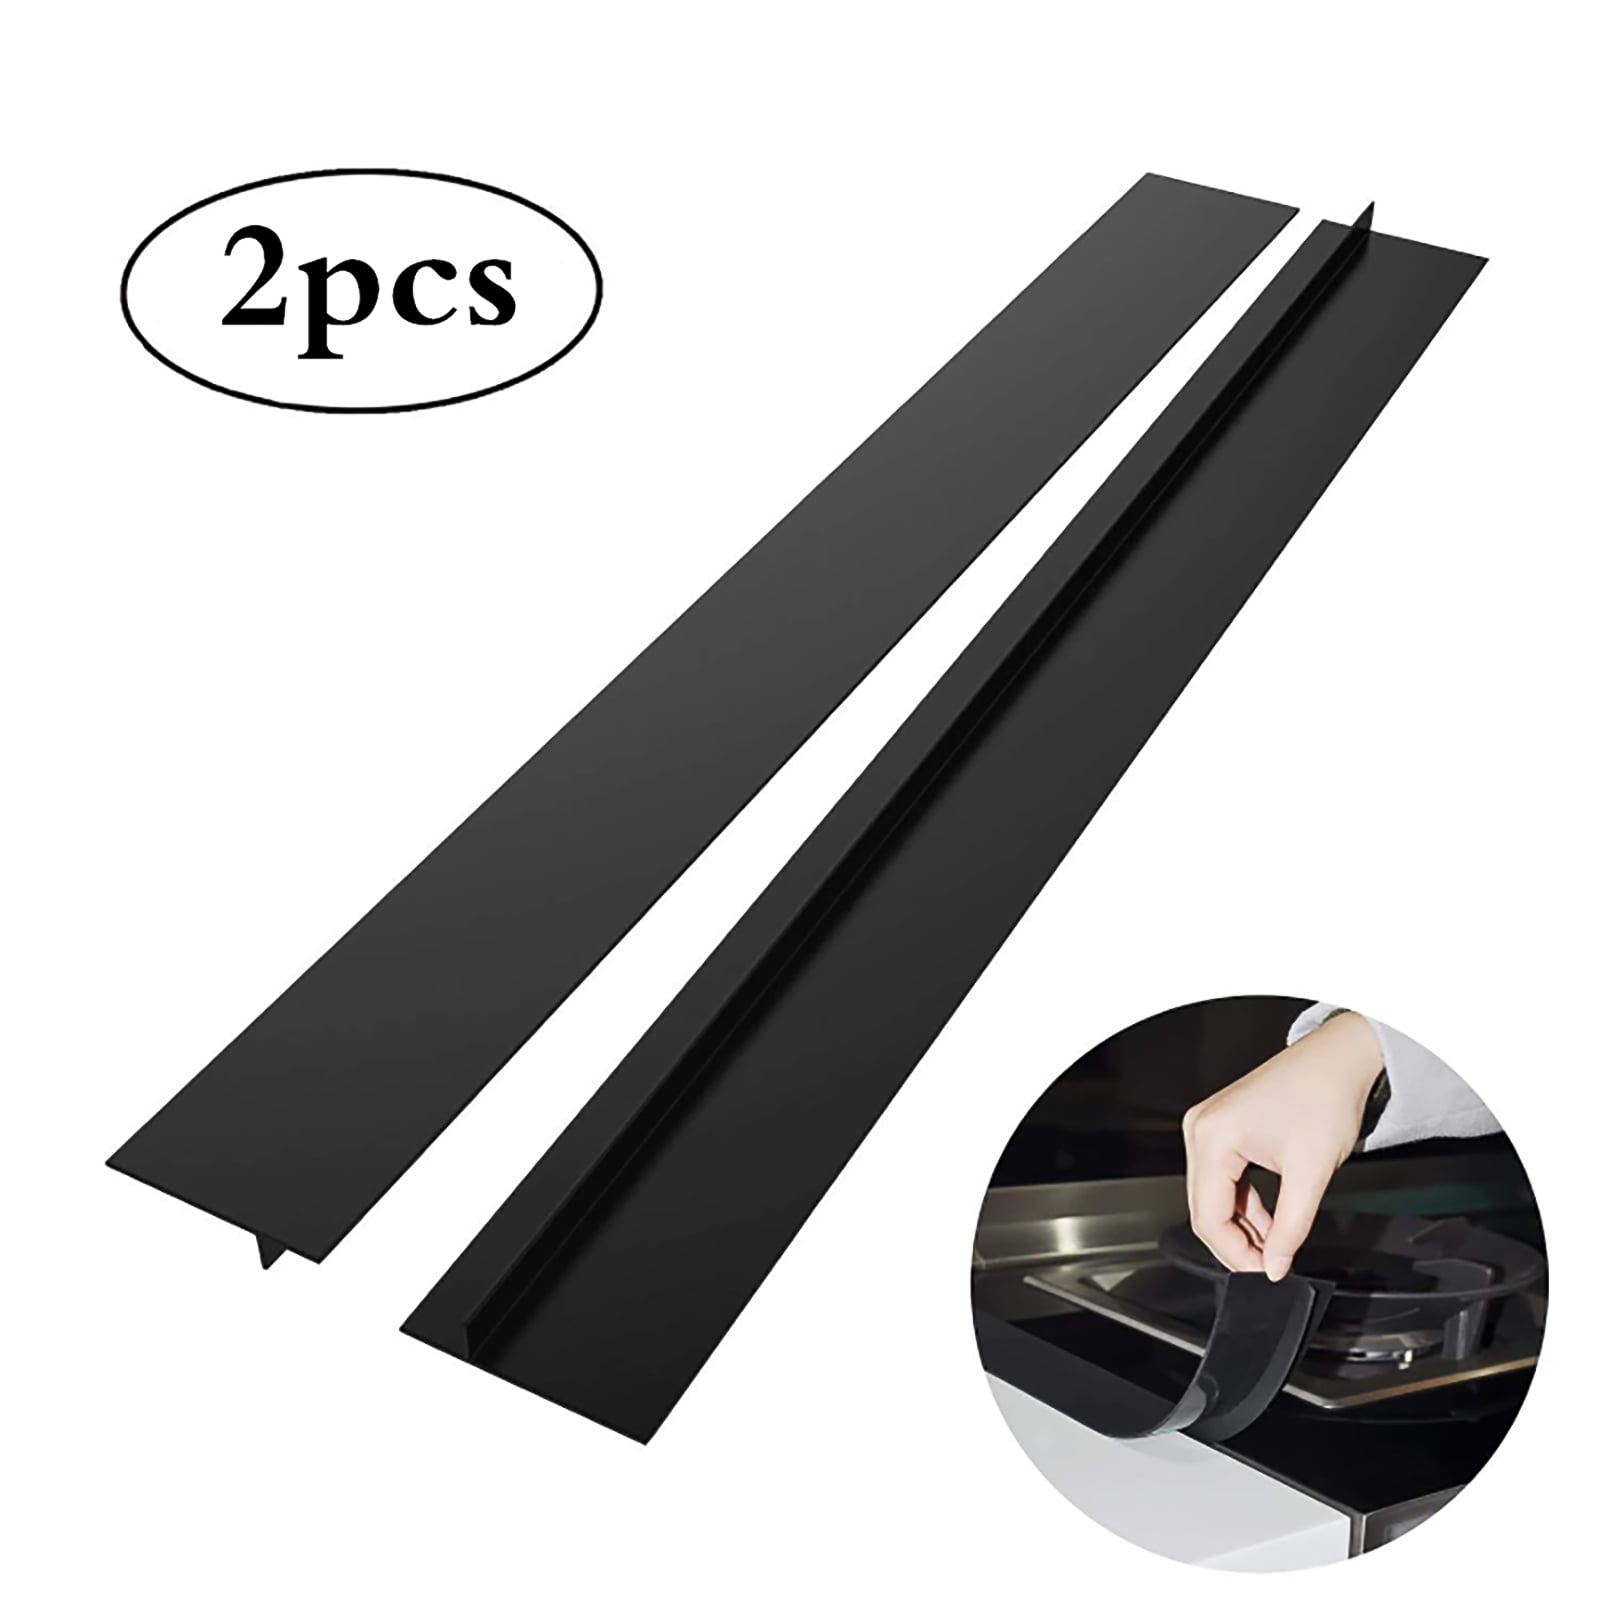 2Pcs Kitchen Stove Counter Gap Silicone Cover Filler Strip Oven Guard Seal Slit 